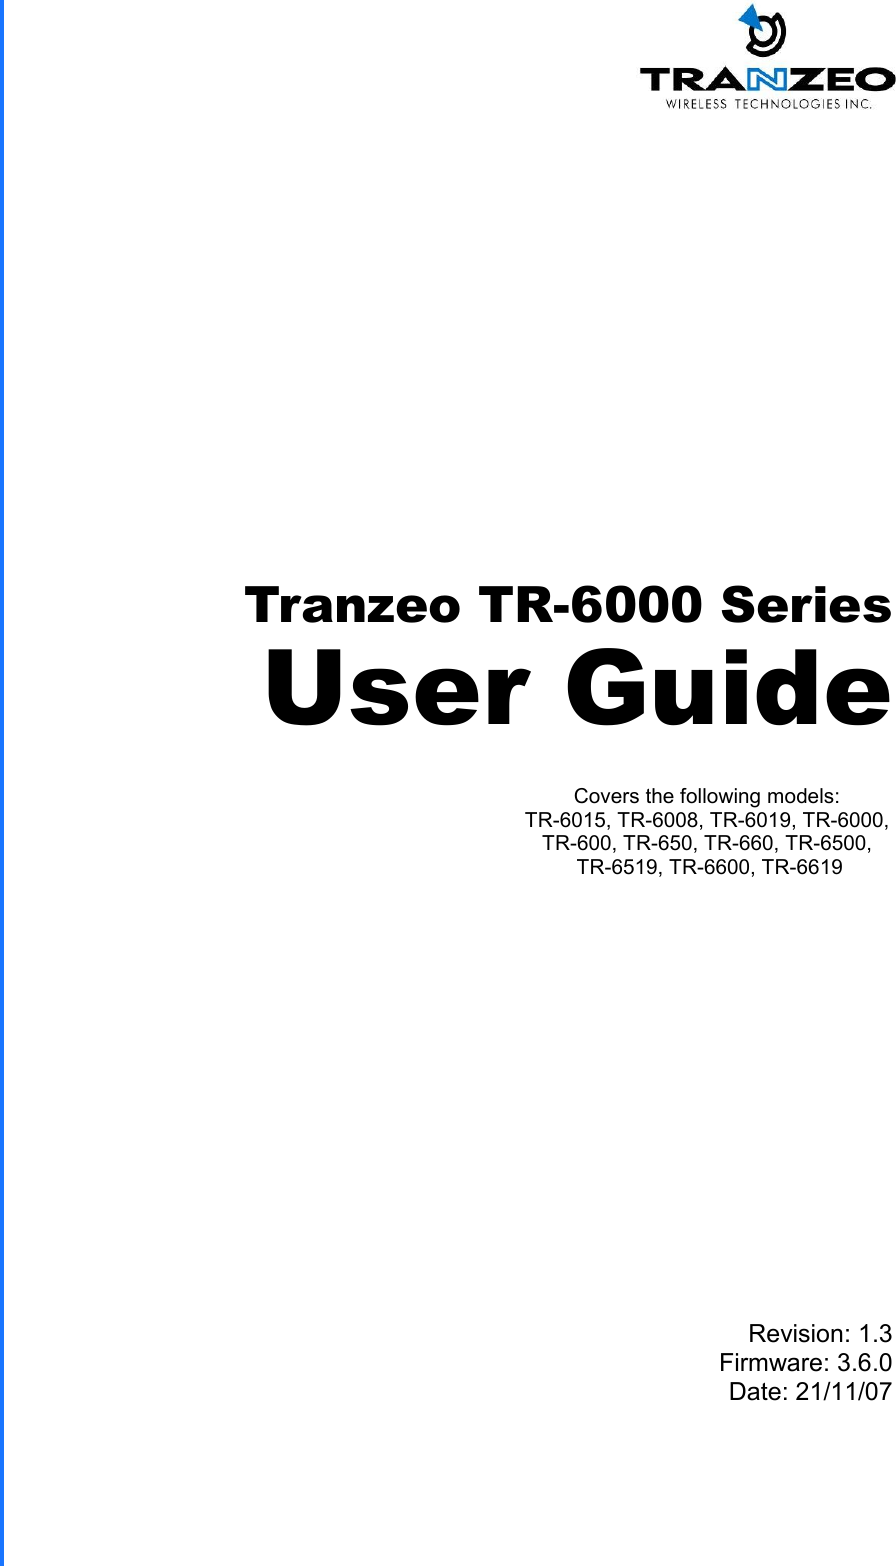  TRANZEO TR-6000 Revision: 1.3 Firmware: 3.6.0 Date: 21/11/07 Tranzeo TR-6000 Series User Guide Covers the following models:   TR-6015, TR-6008, TR-6019, TR-6000,  TR-600, TR-650, TR-660, TR-6500,  TR-6519, TR-6600, TR-6619 